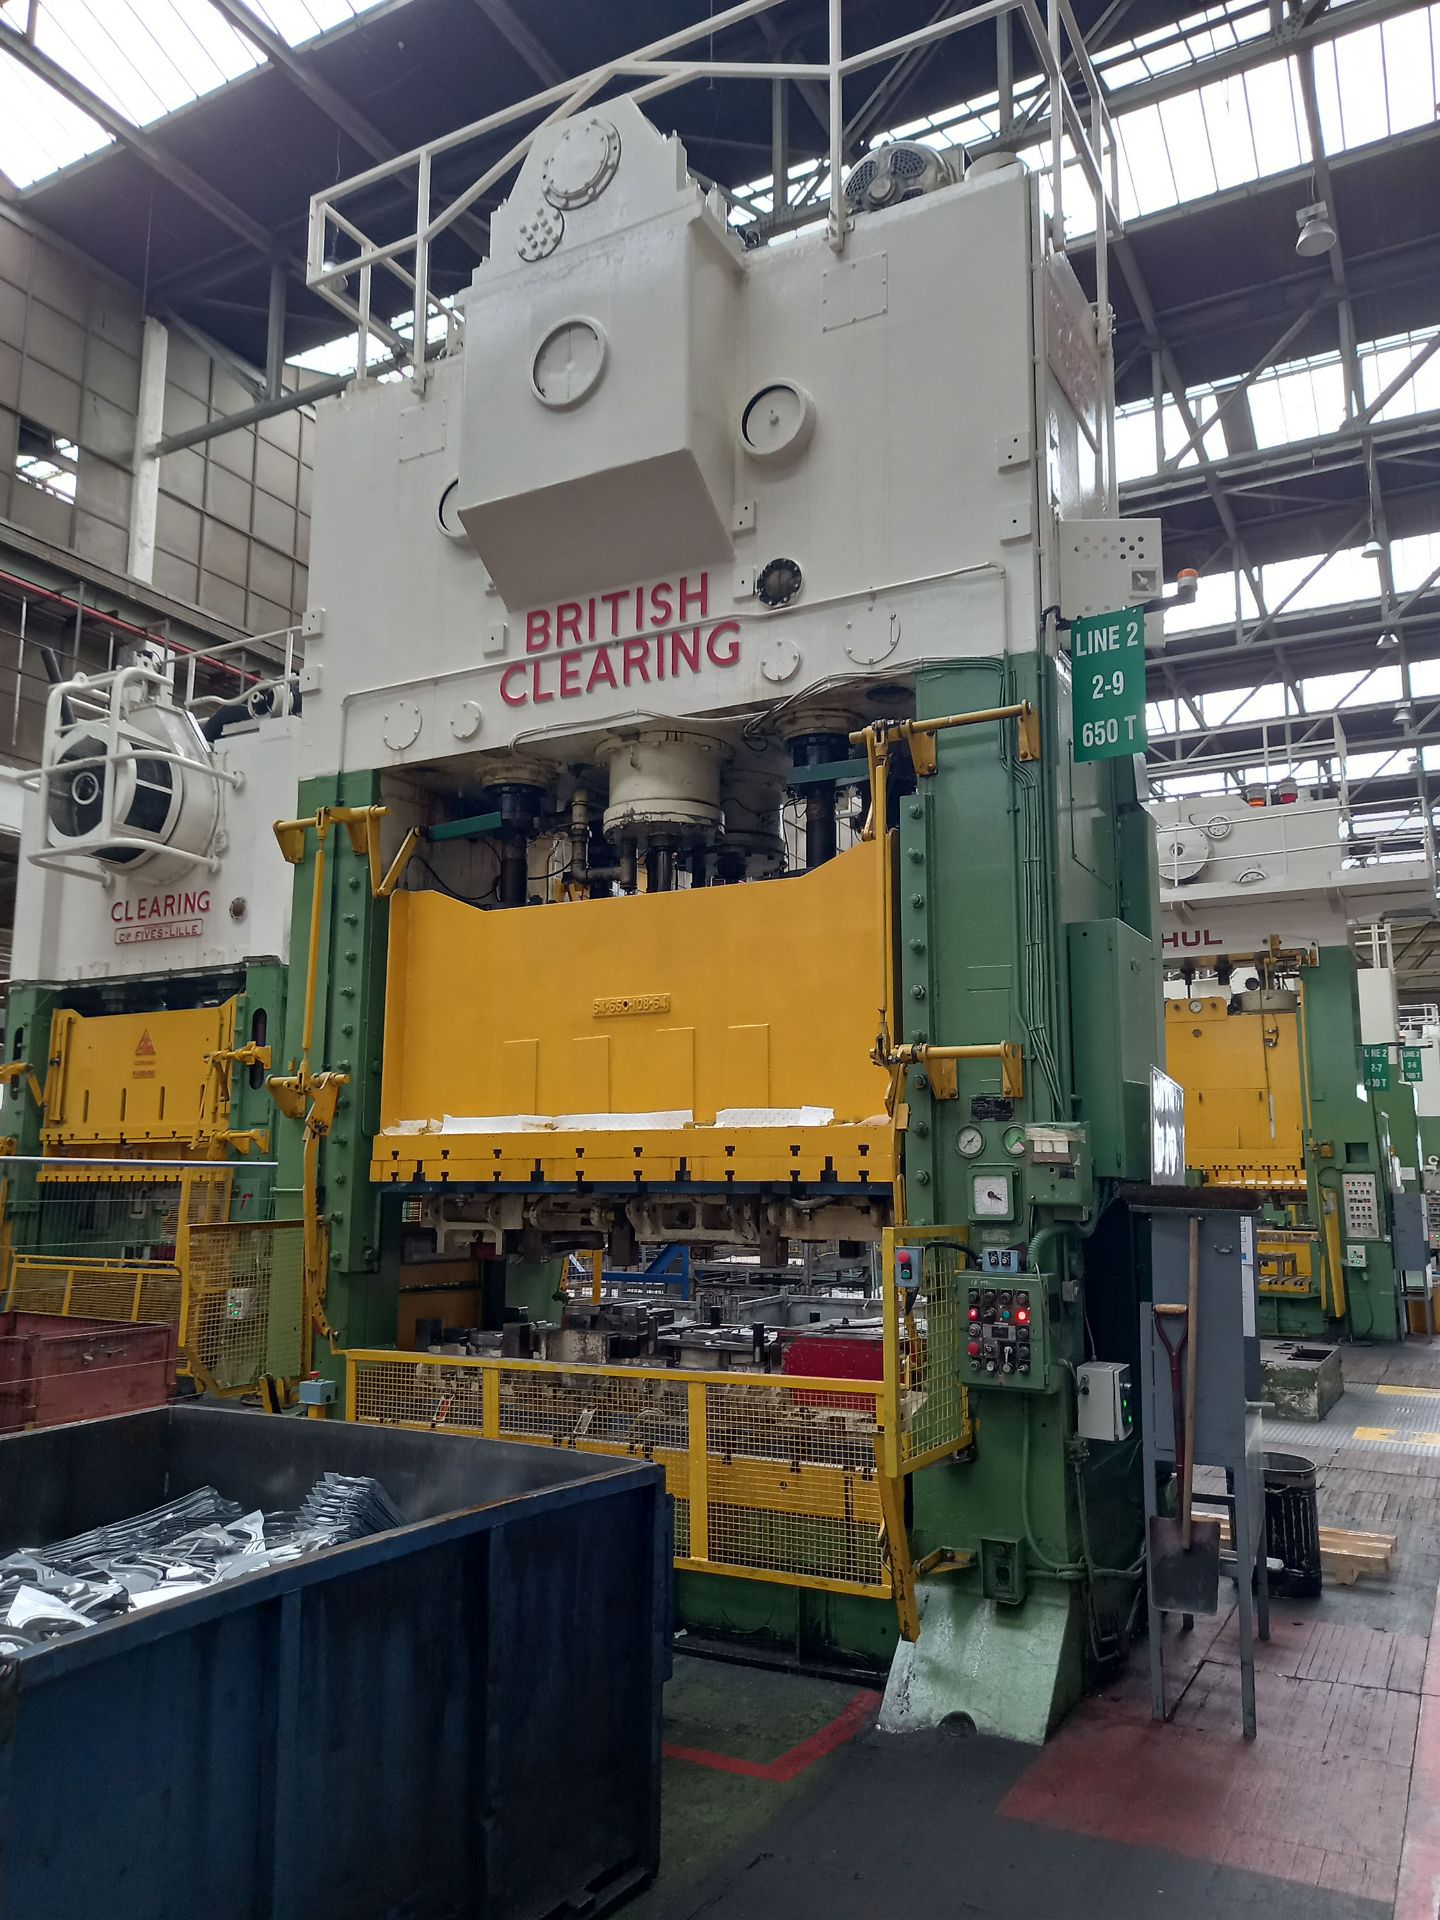 British Clearing S4-650-108-64 650T Double Column Press.